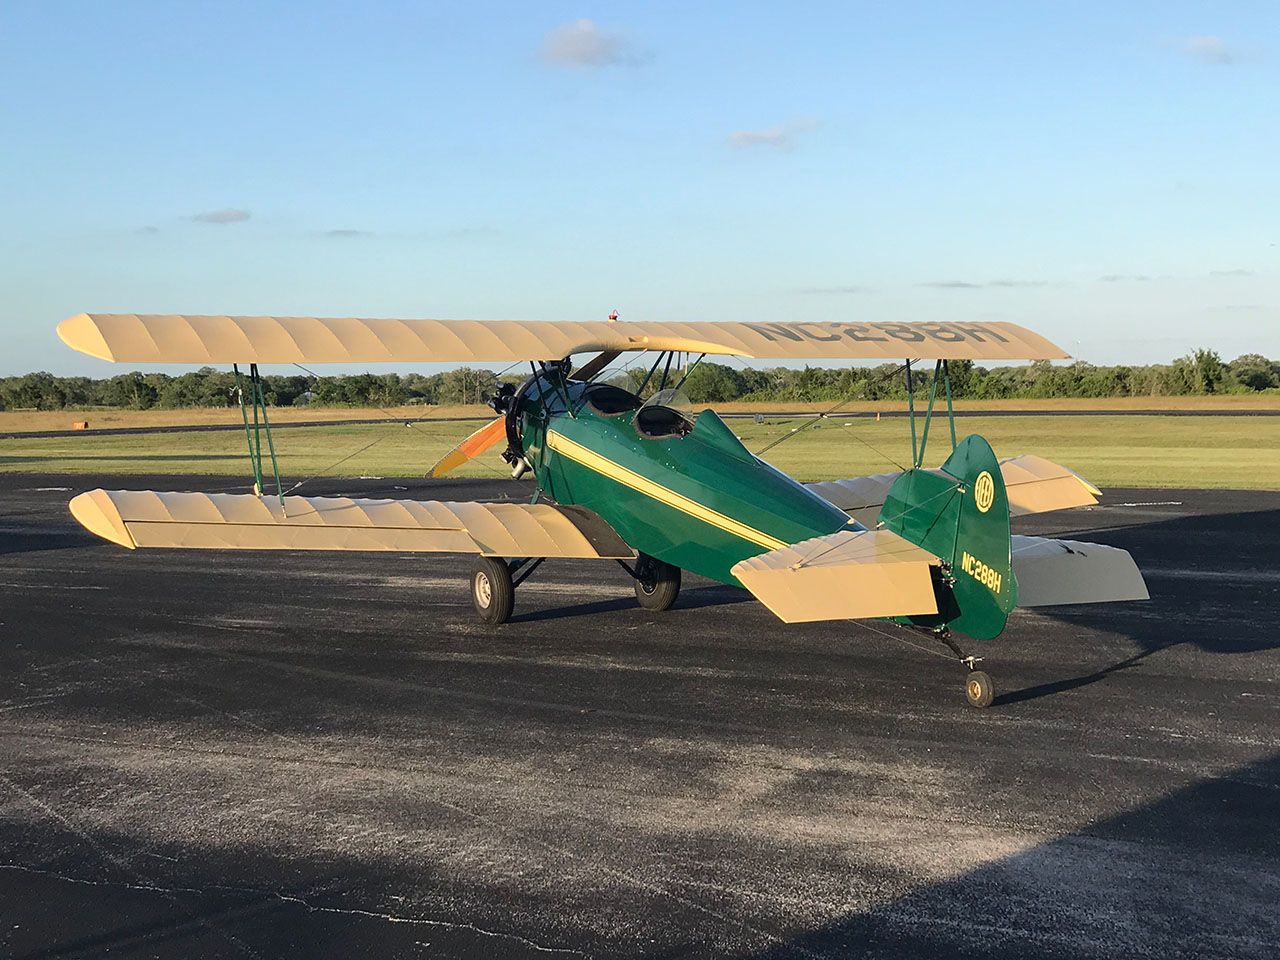 Green and yellow Fleet biplane sitting on taxiway